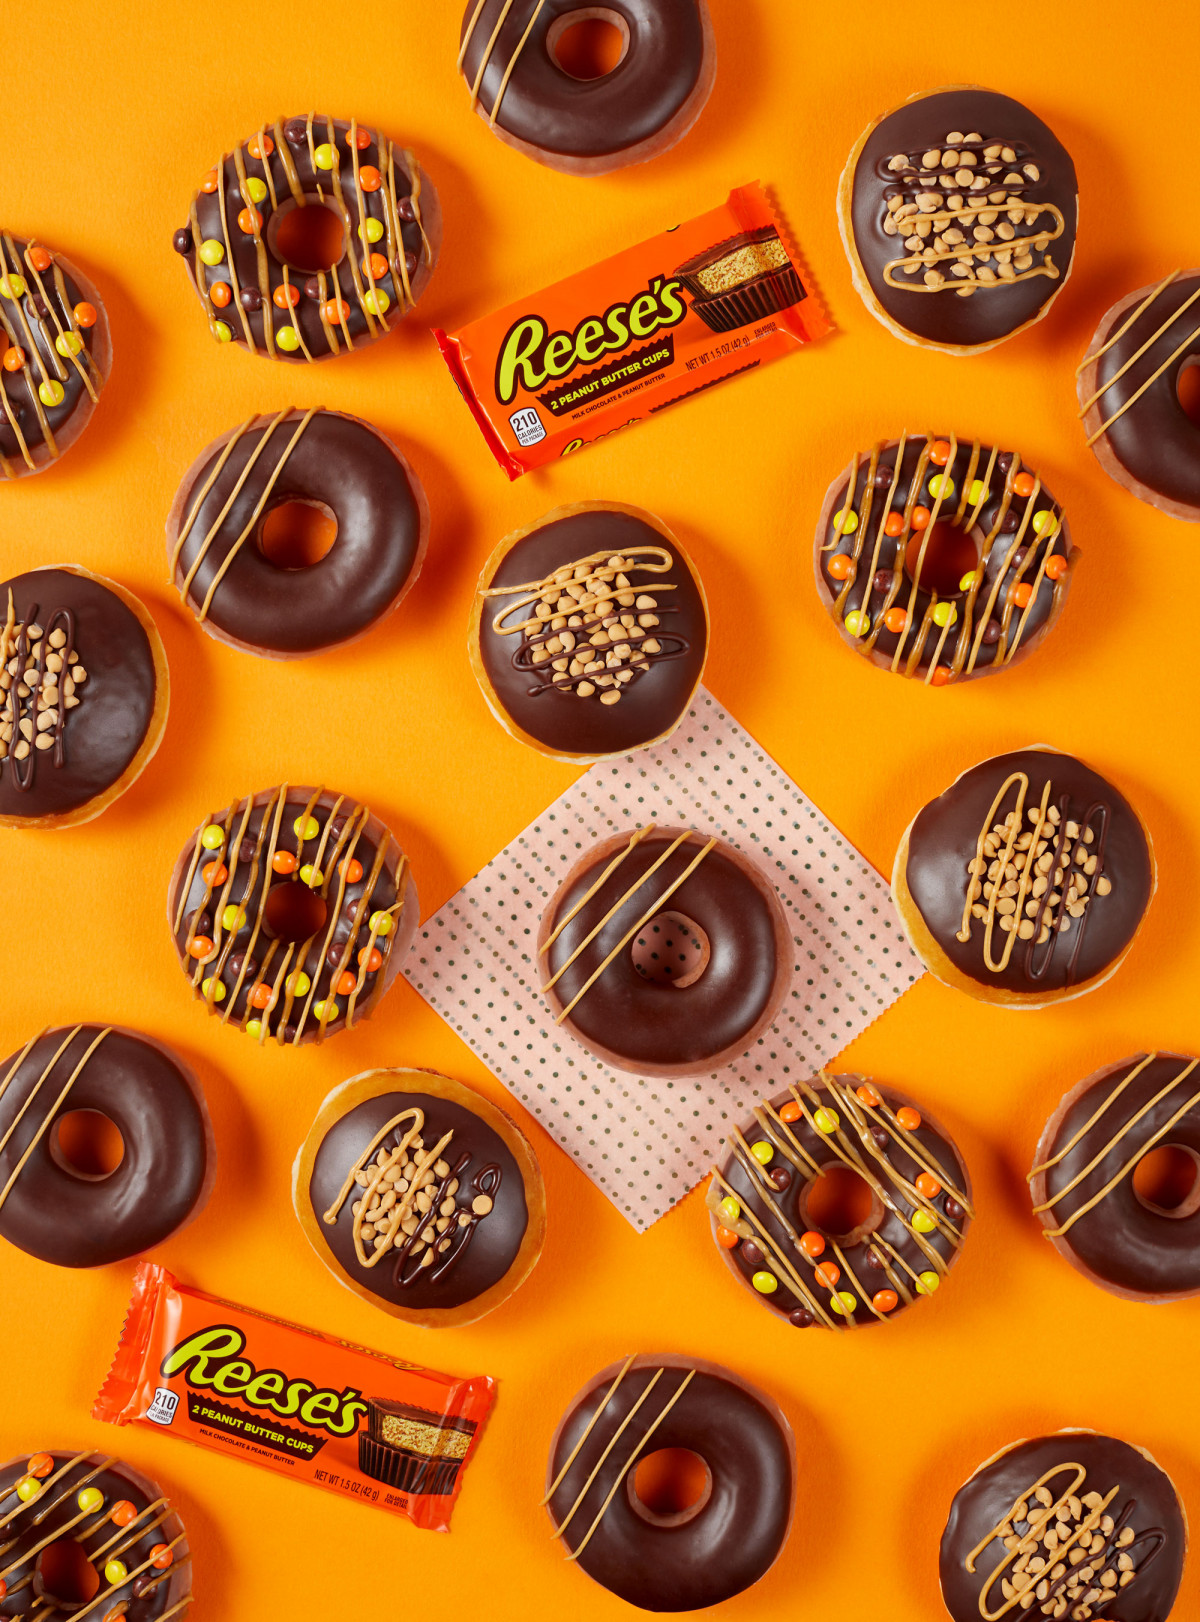 Commercial food photography of Krispy Kreme Reese's Doughnuts on an orange background